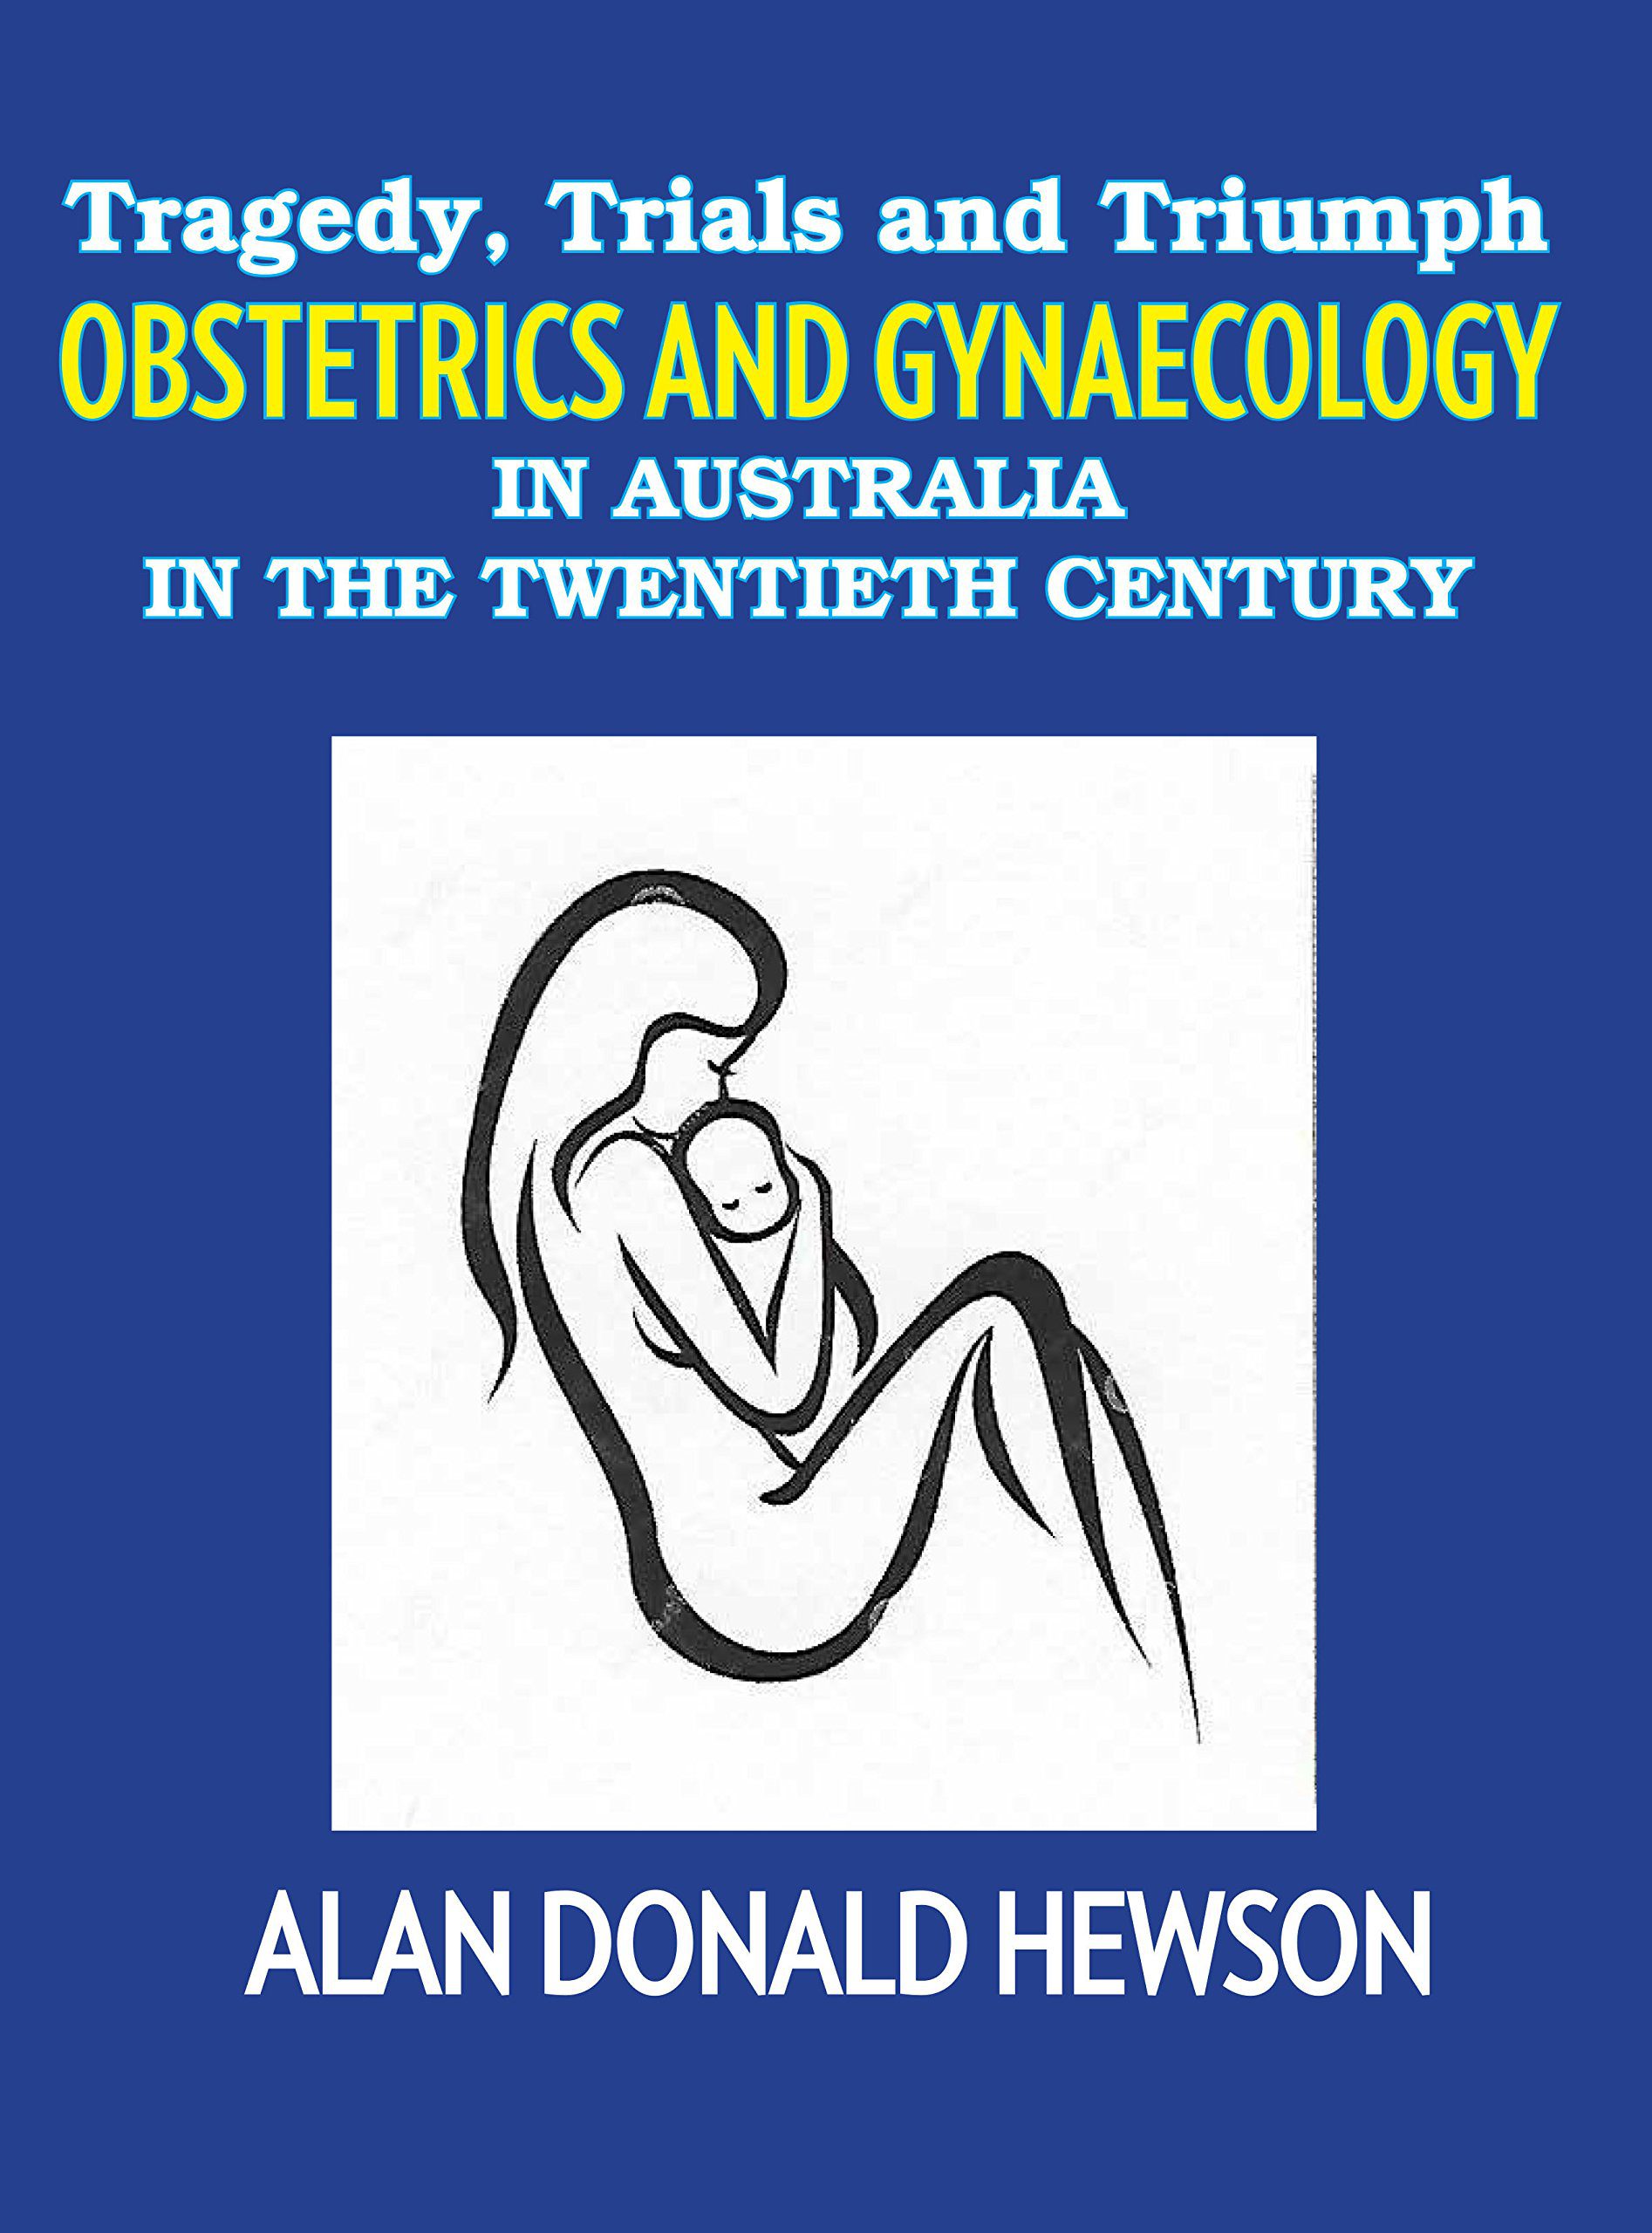 PDF Sample Tragedy, Trials and Triumphs Obstetrics and Gynaecology in Australia in the Twentieth Century